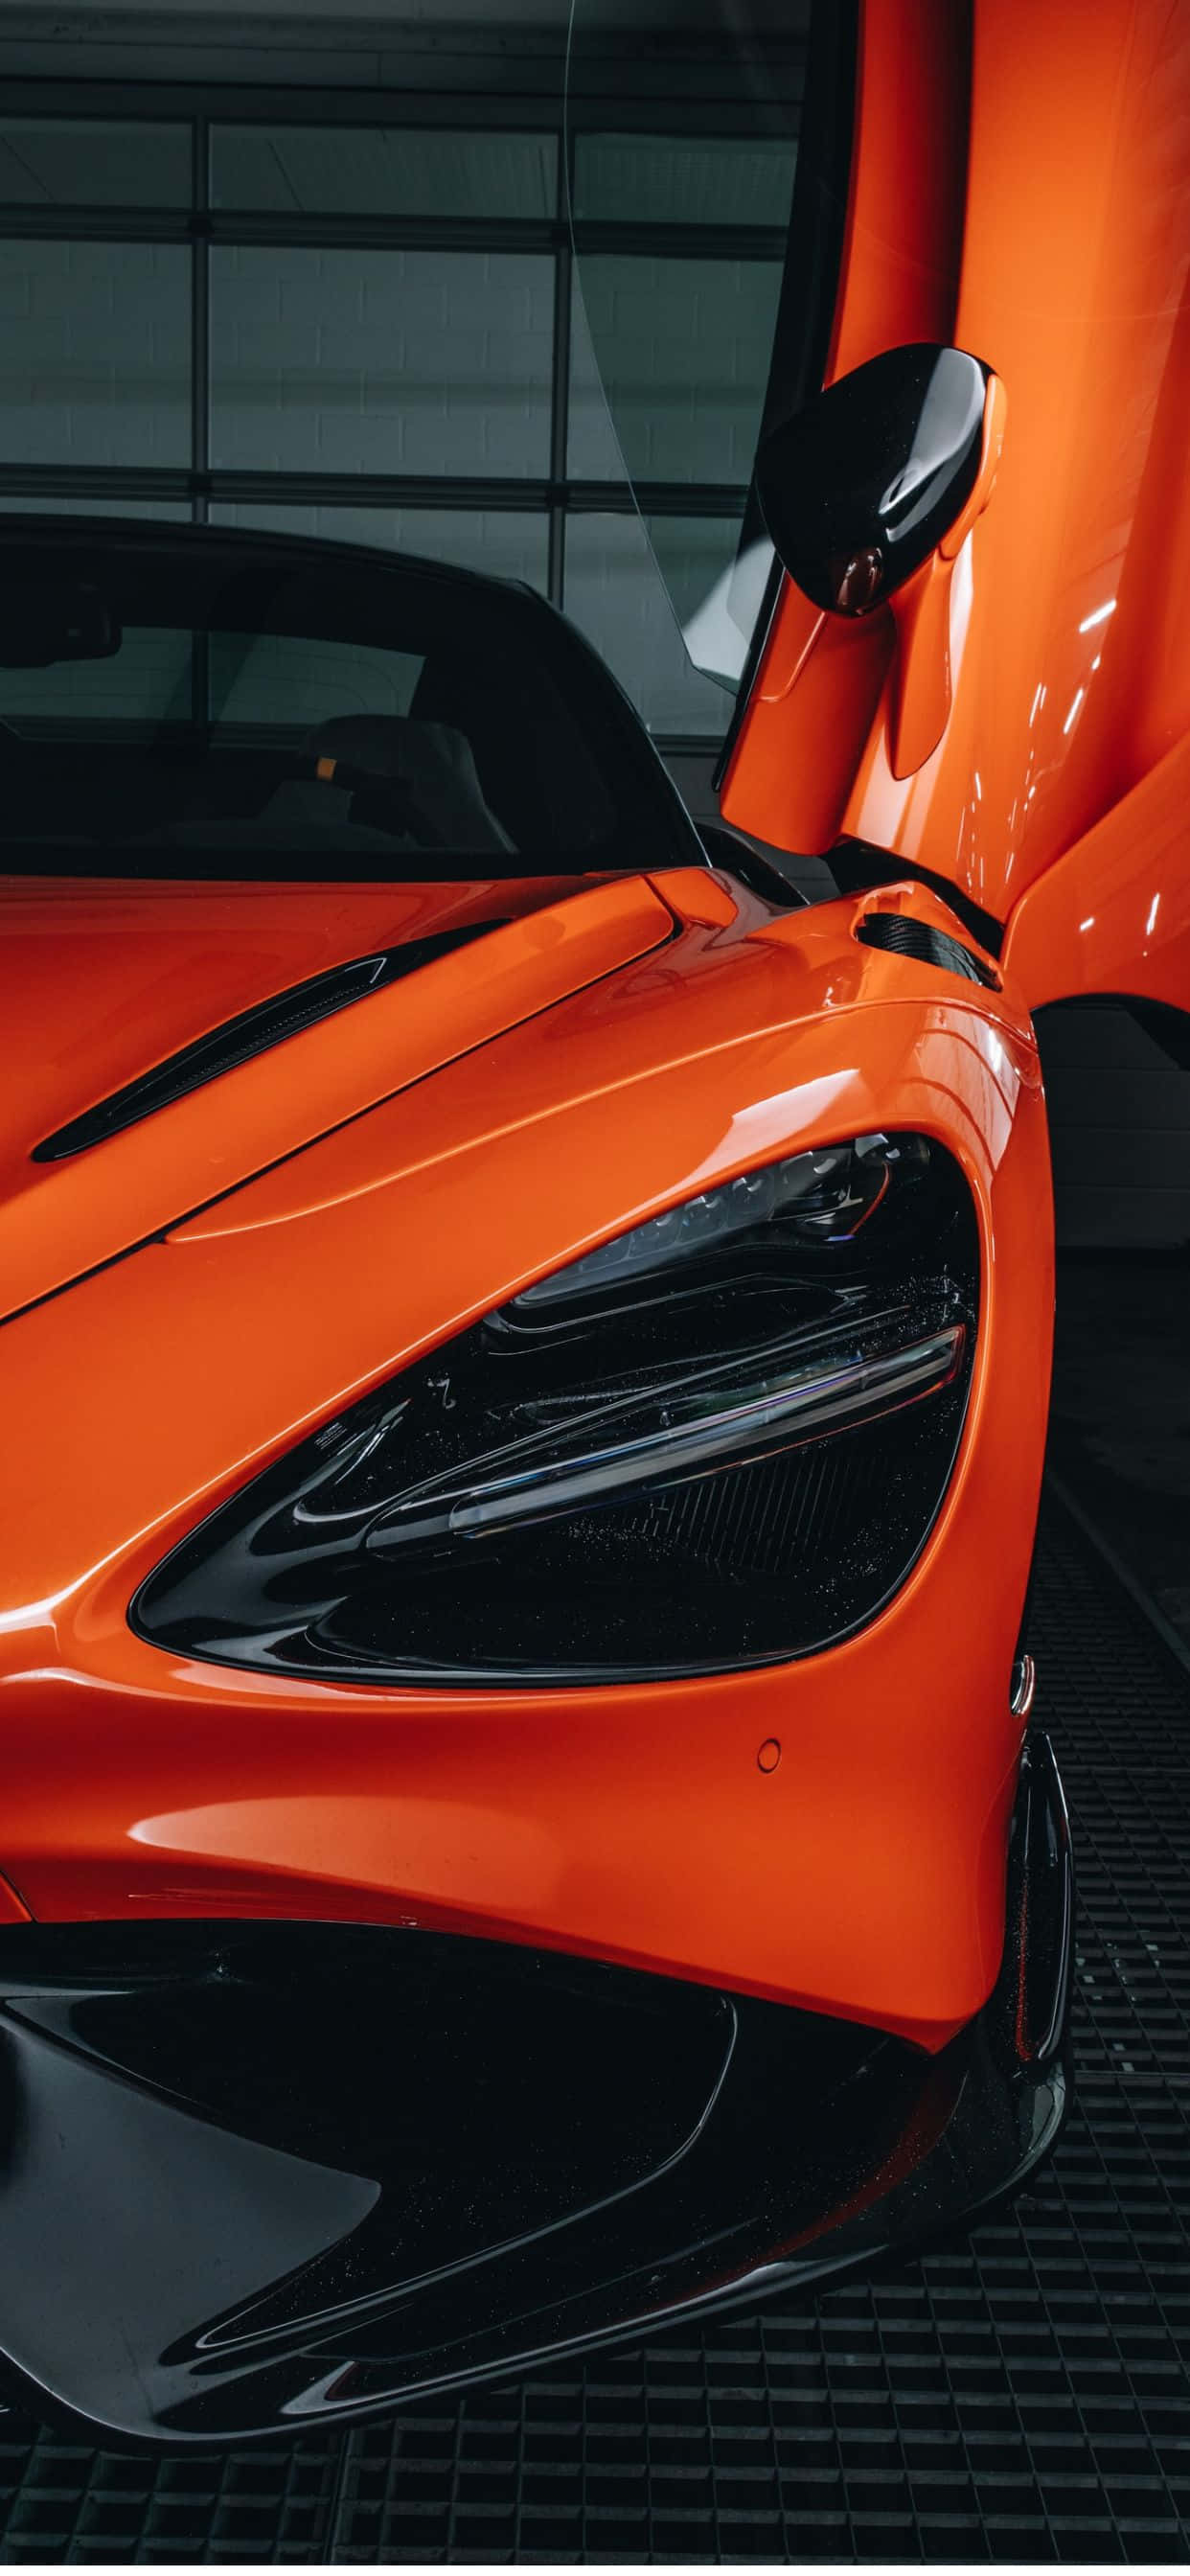 Get your hands on the elite combo of iPhones Xs Max and the Mclaren 720s.